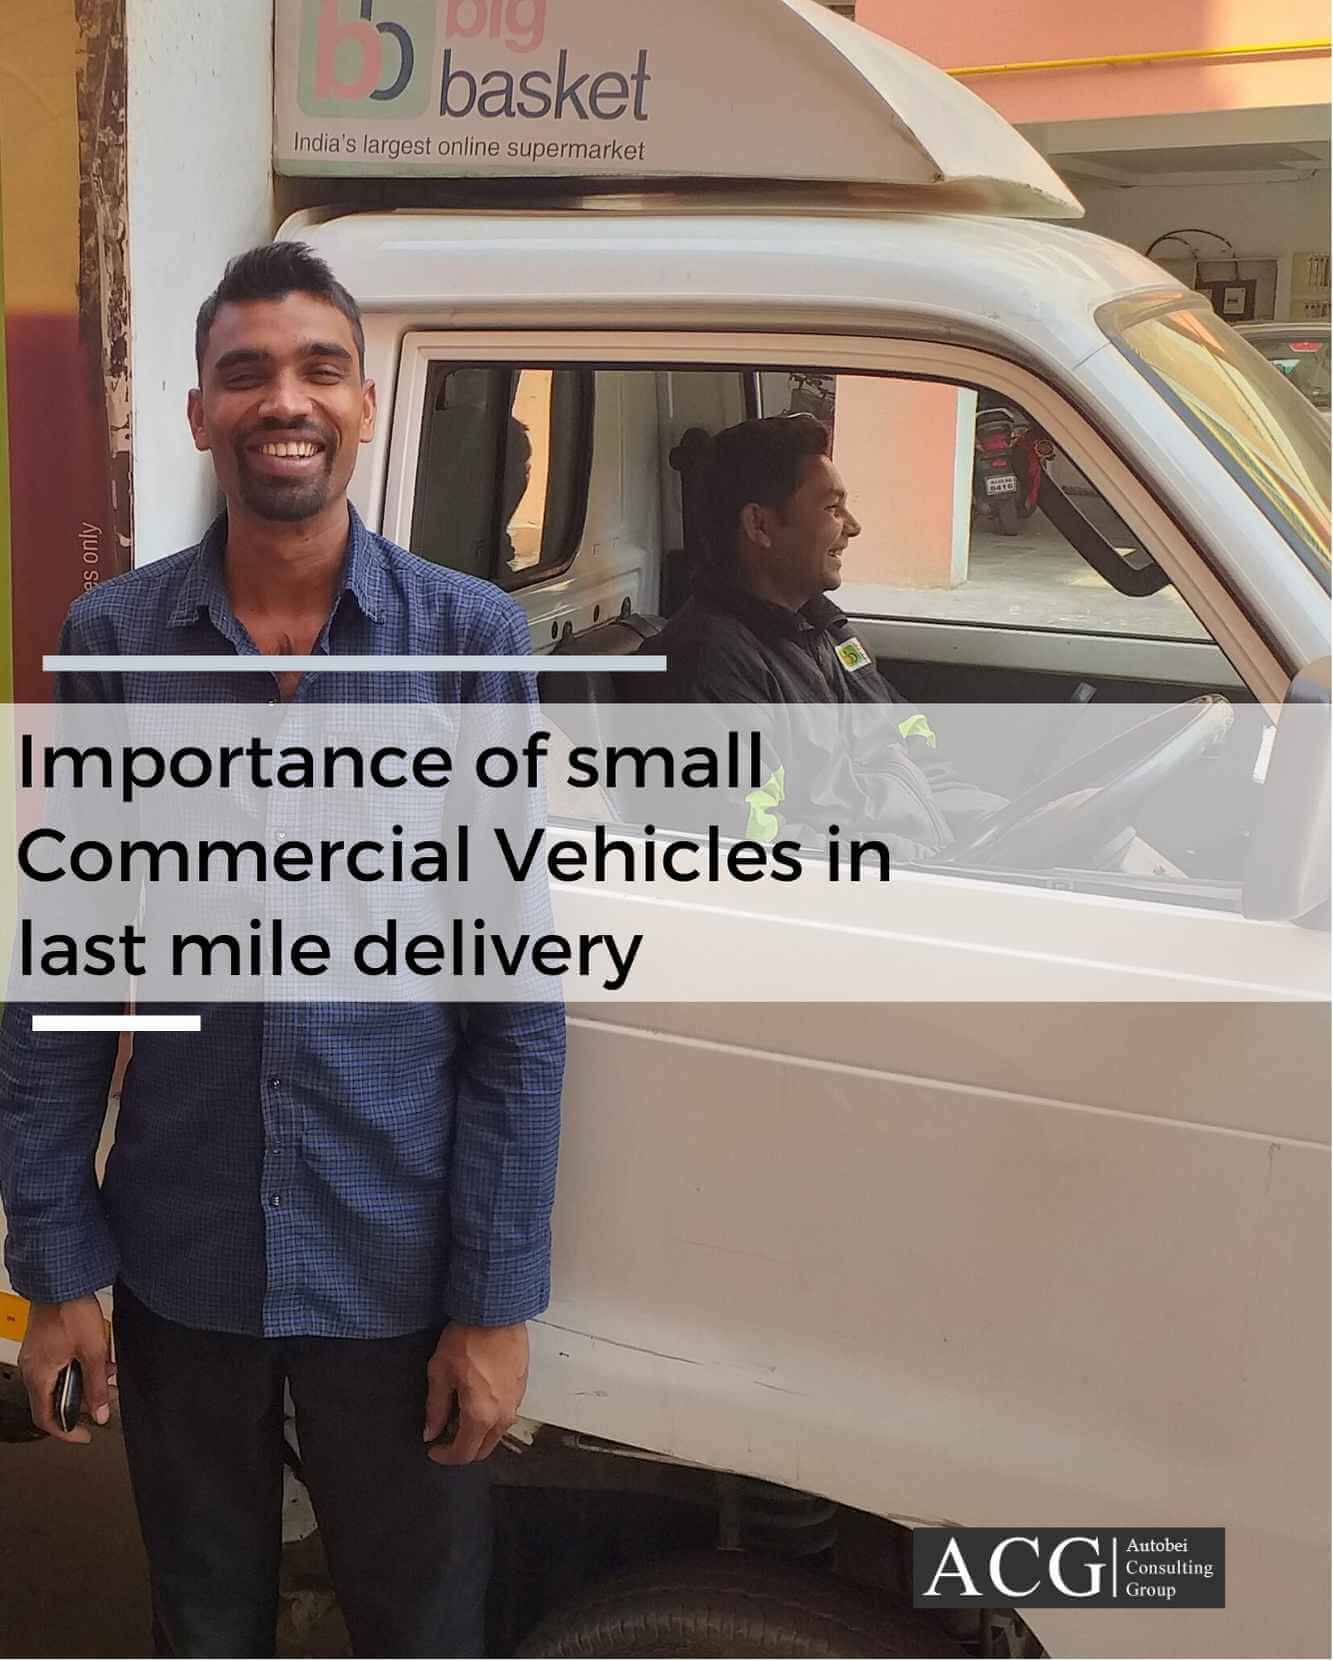 Importance of small commercial vehicles in last mile delivery